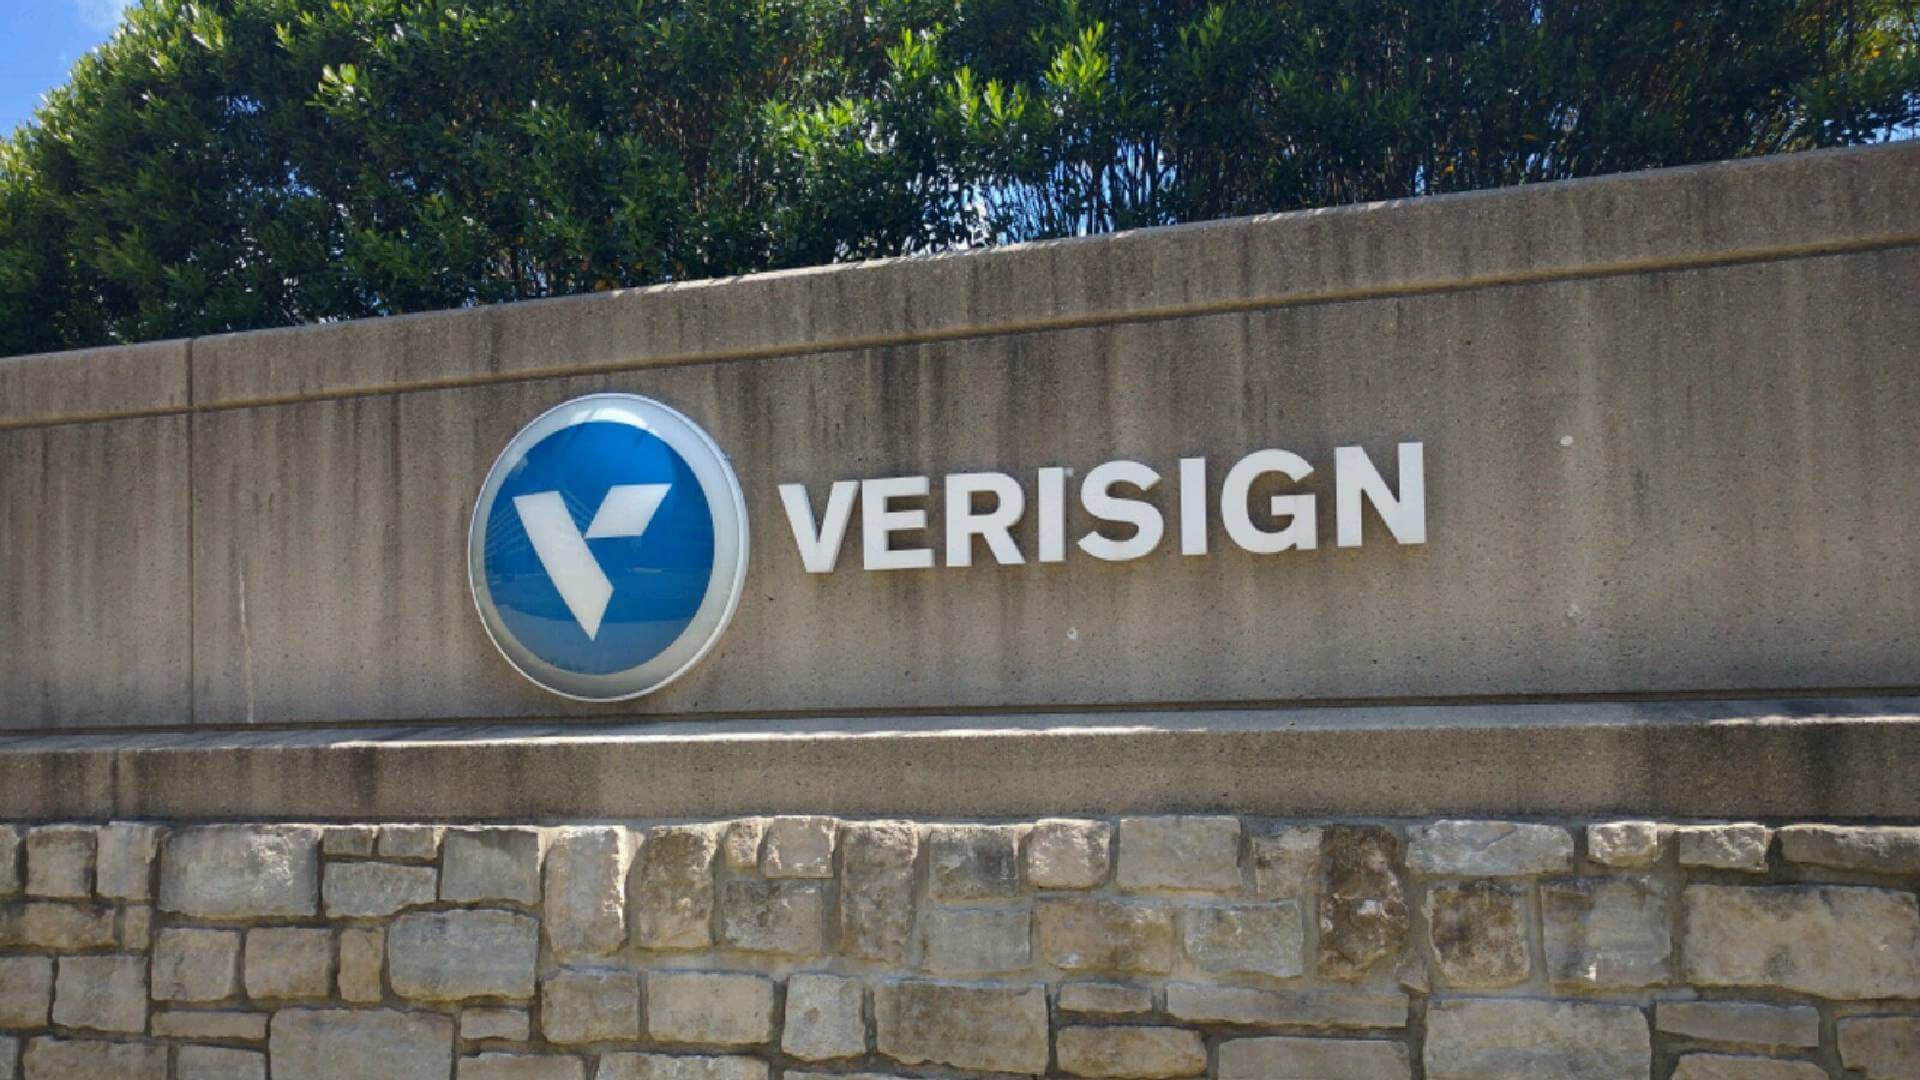 Verisign (VRSN) Continues To Stay Fit and Buyback Shares